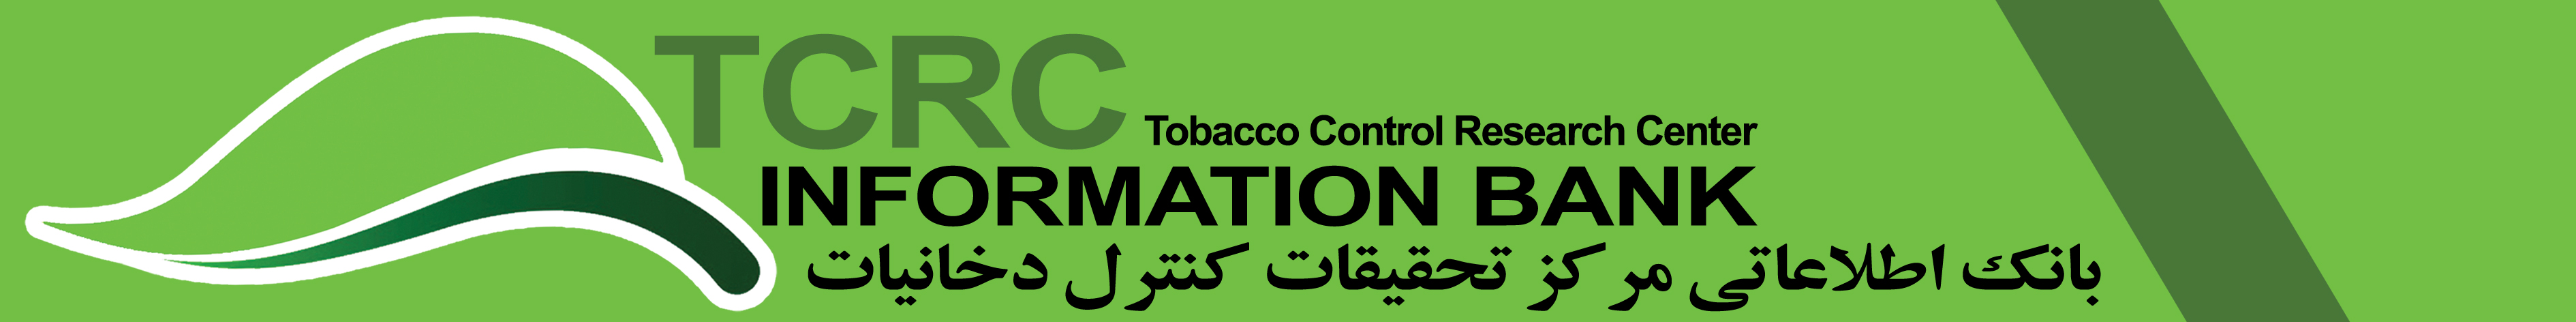 TCRC: Tobacco Control Research Center